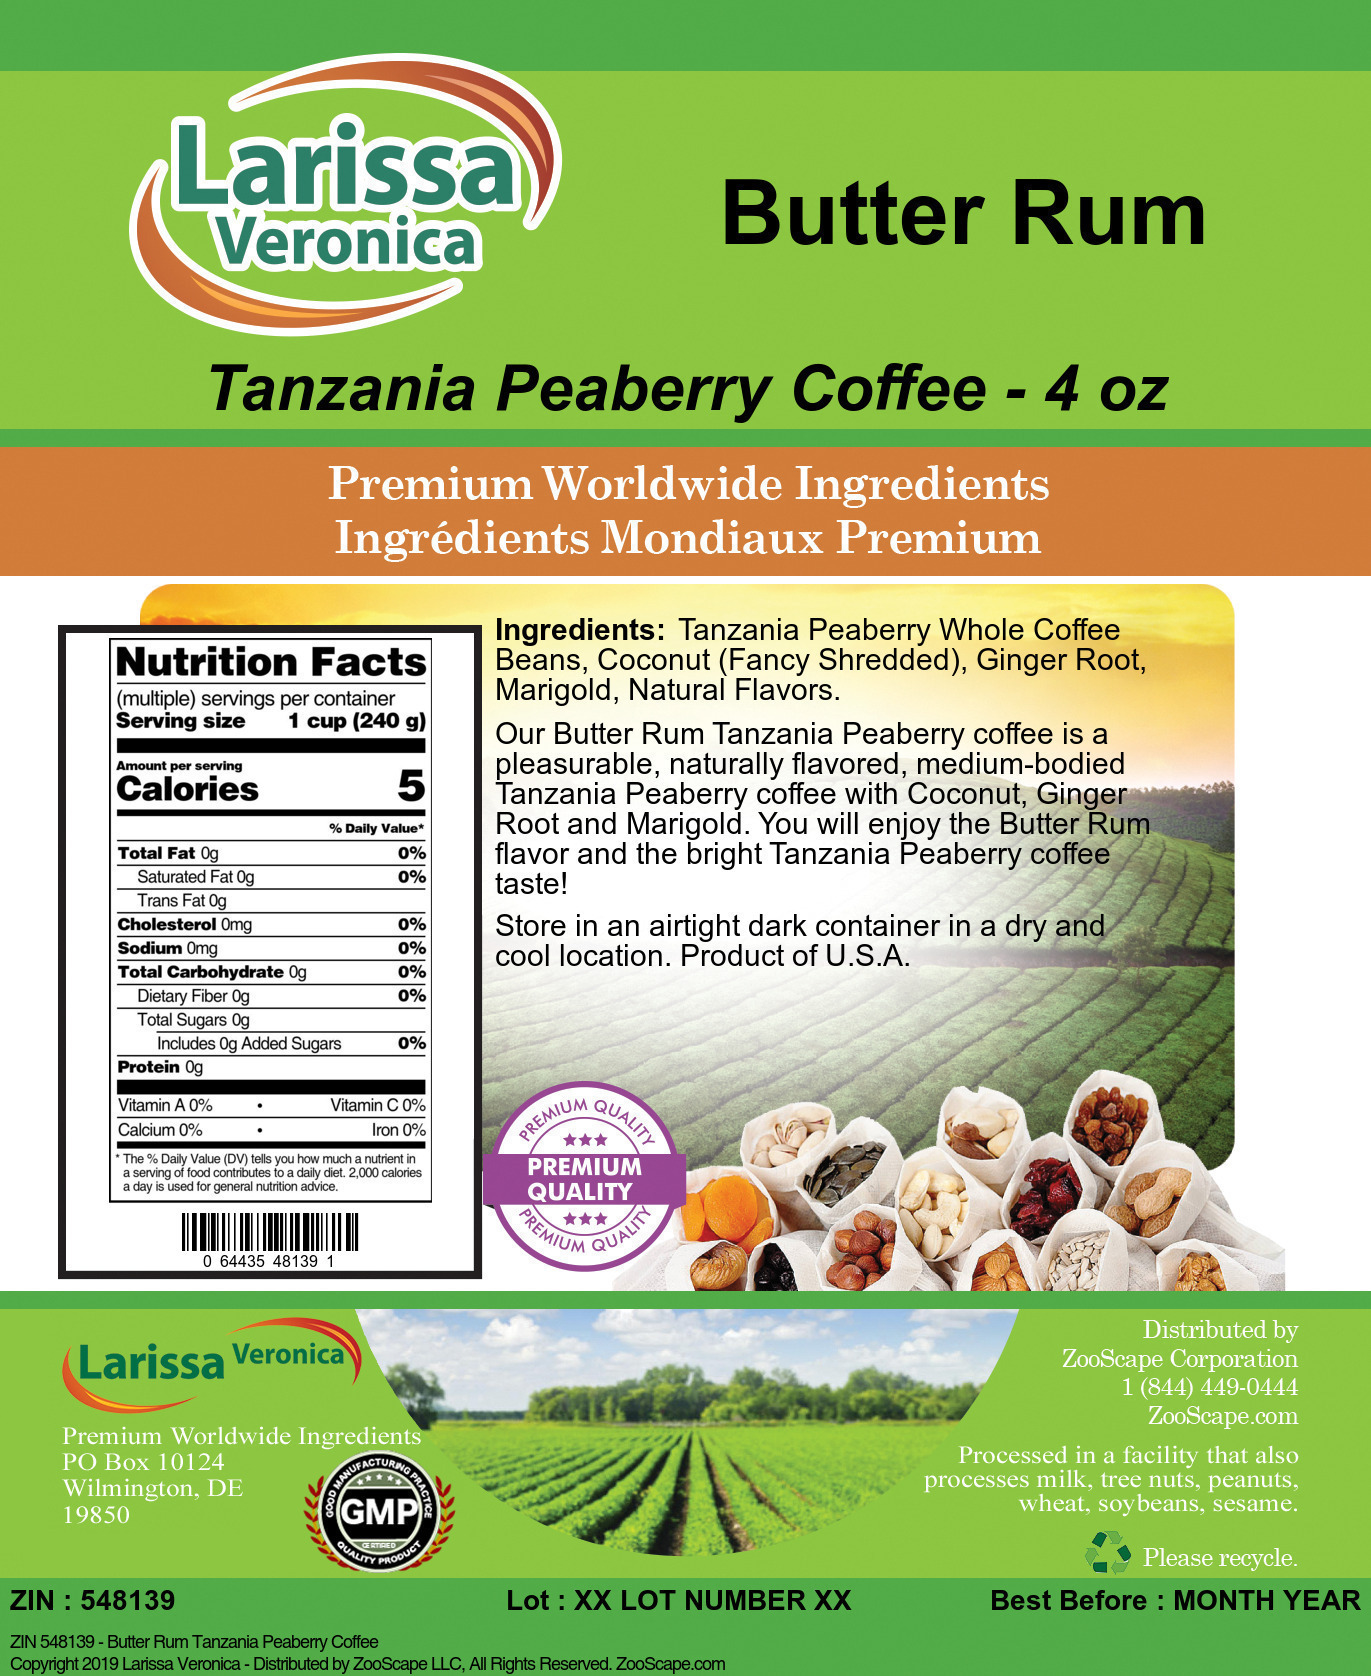 Butter Rum Tanzania Peaberry Coffee - Label